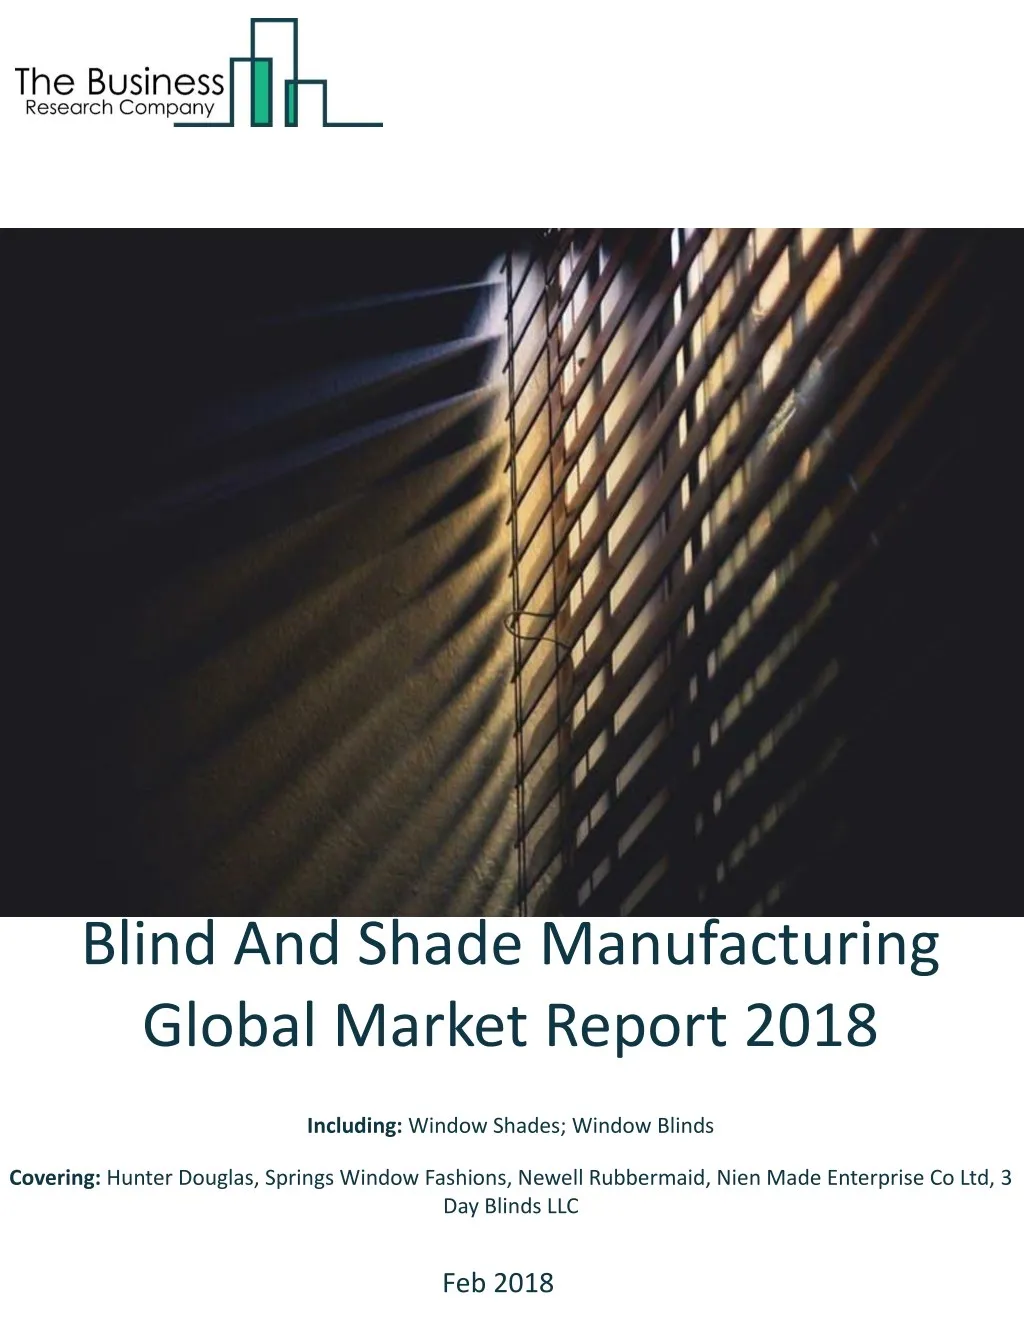 blind and shade manufacturing global market